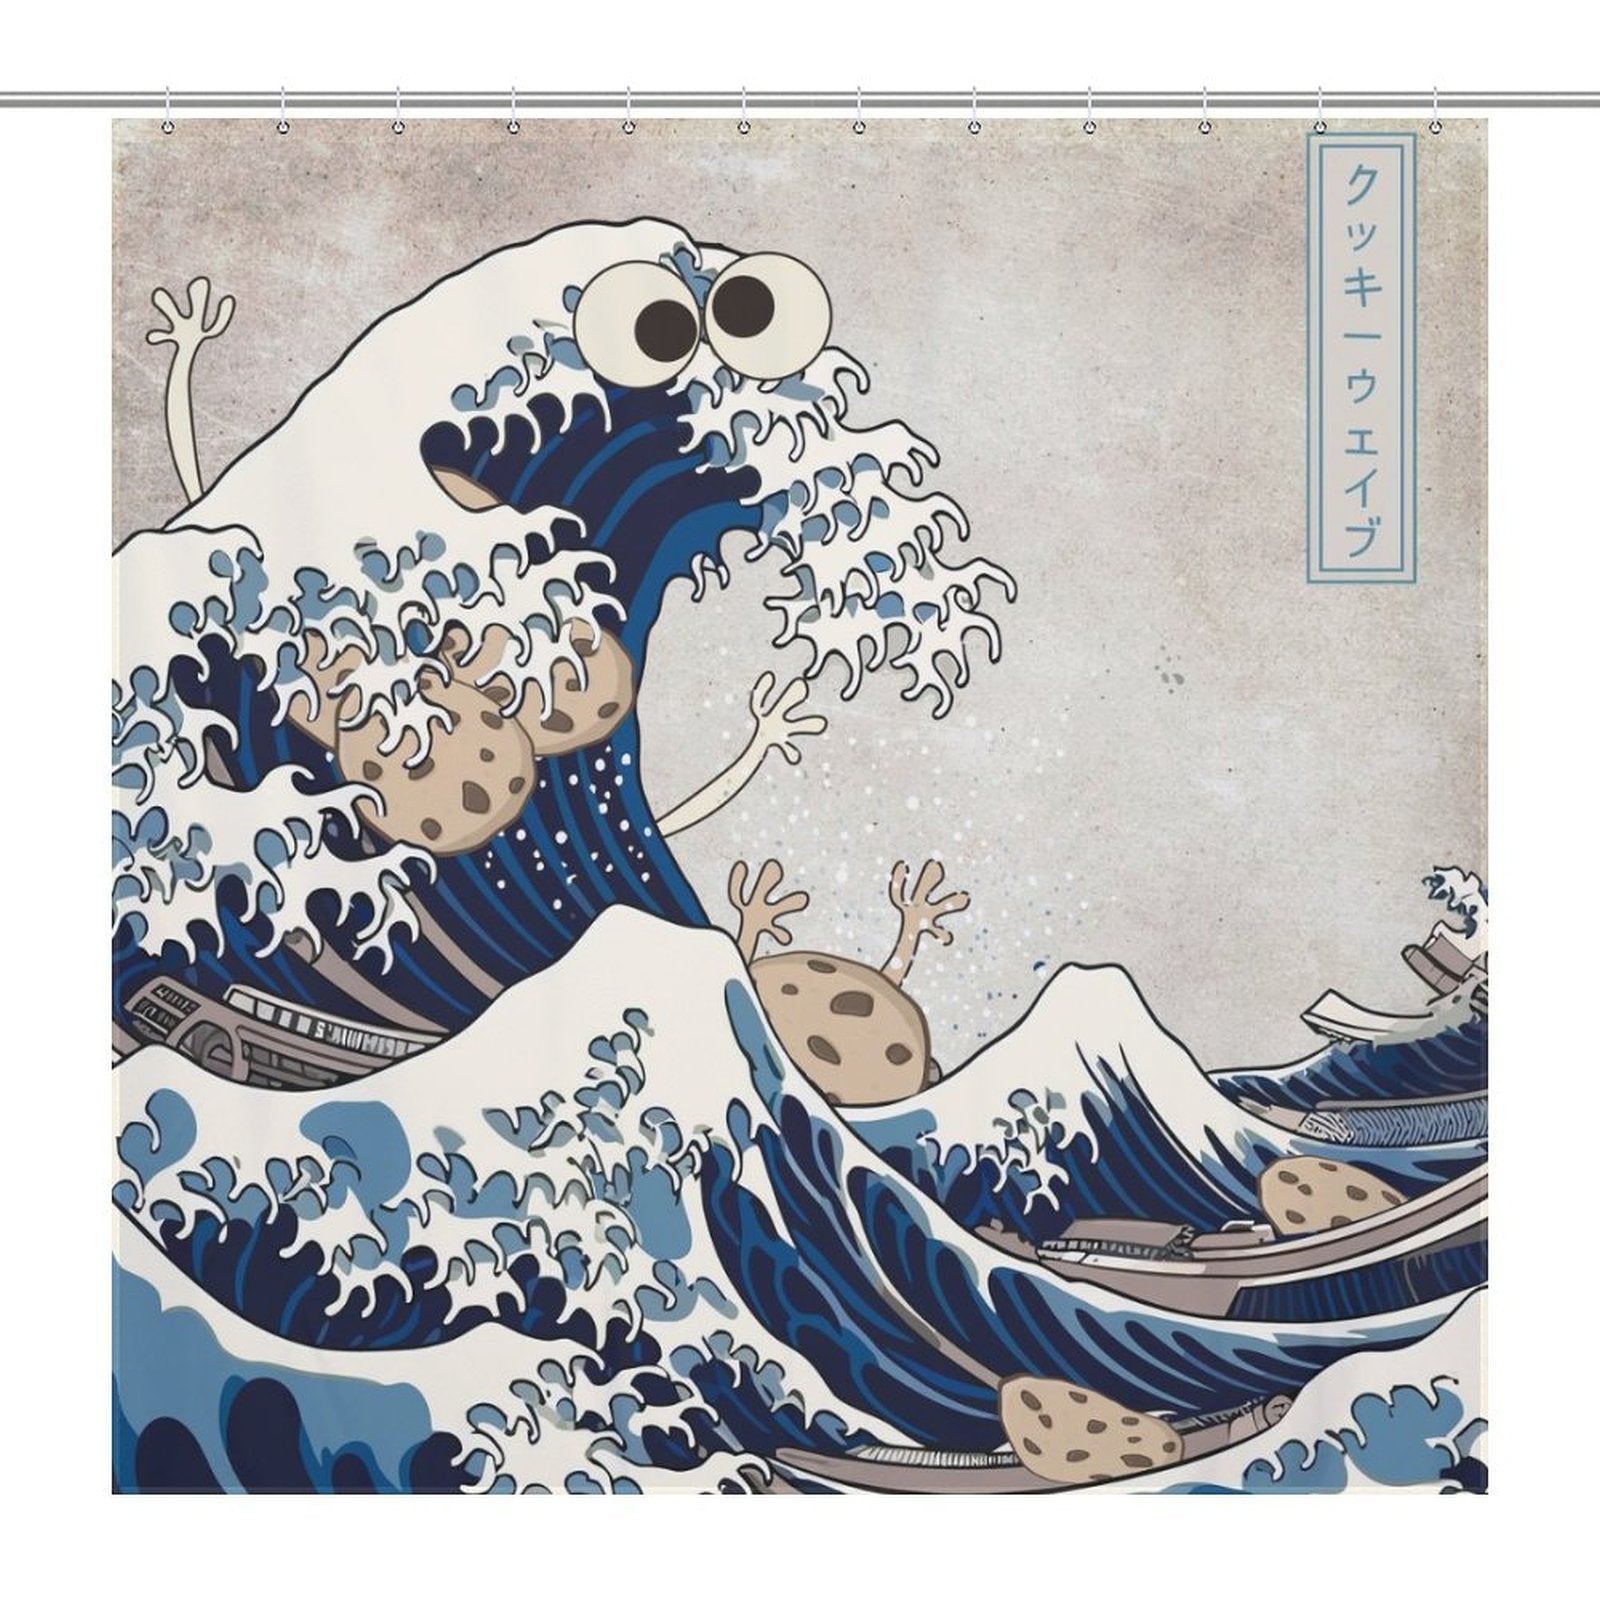 A cartoon depiction of cookies with googly eyes riding a Funny Wave Monster Eating Cookies Shower Curtain-Cottoncat, inspired by the famous artwork "The Great Wave off Kanagawa." This whimsical bathroom decor by Cotton Cat will bring a touch of humor to your space.